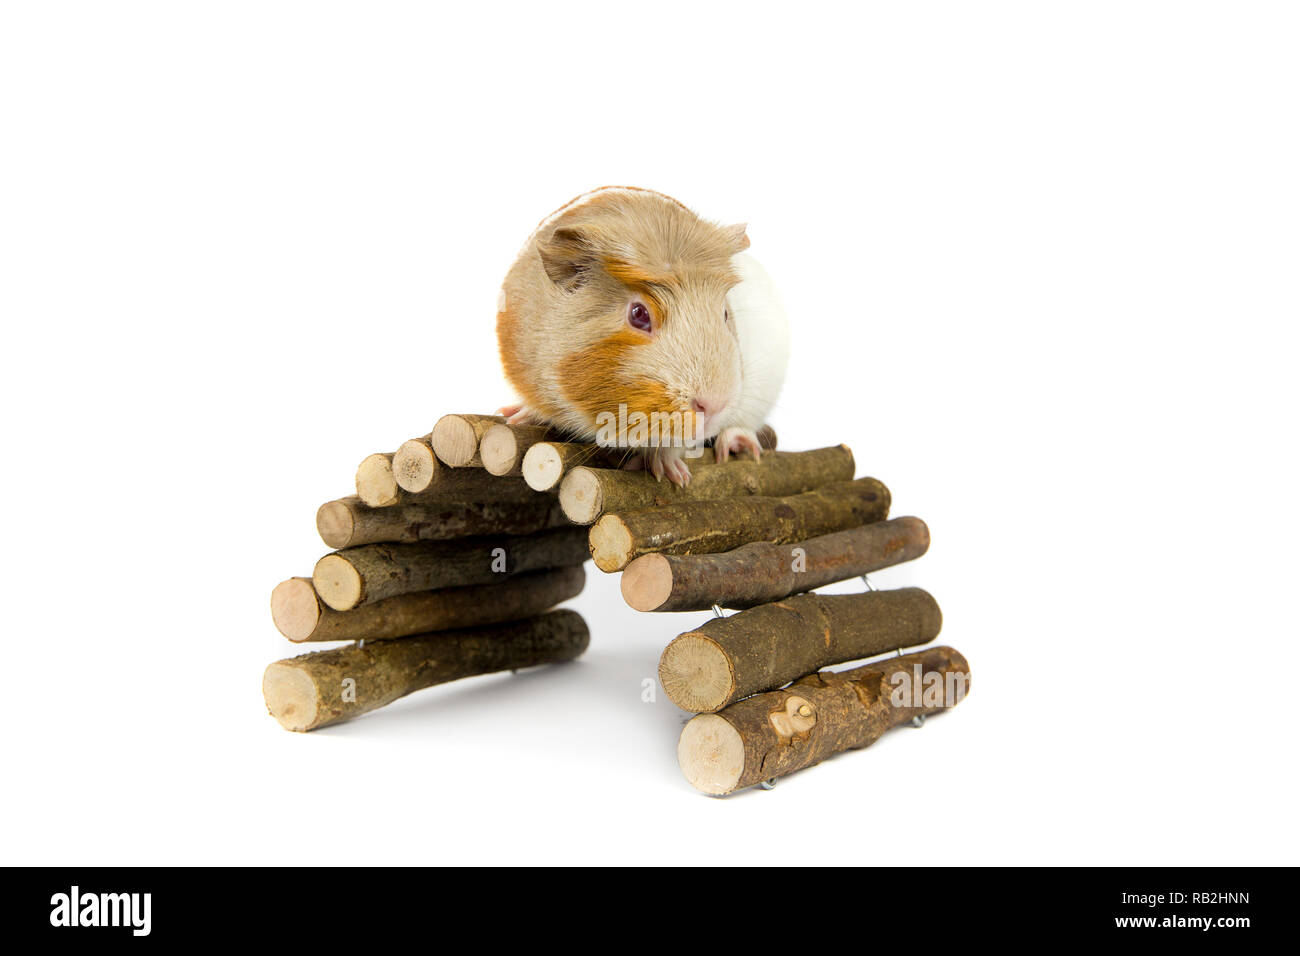 Domestic guinea pig (Cavia porcellus), also known as cavy or domestic cavy with wooden branch bridge isolated on white in studio. Stock Photo